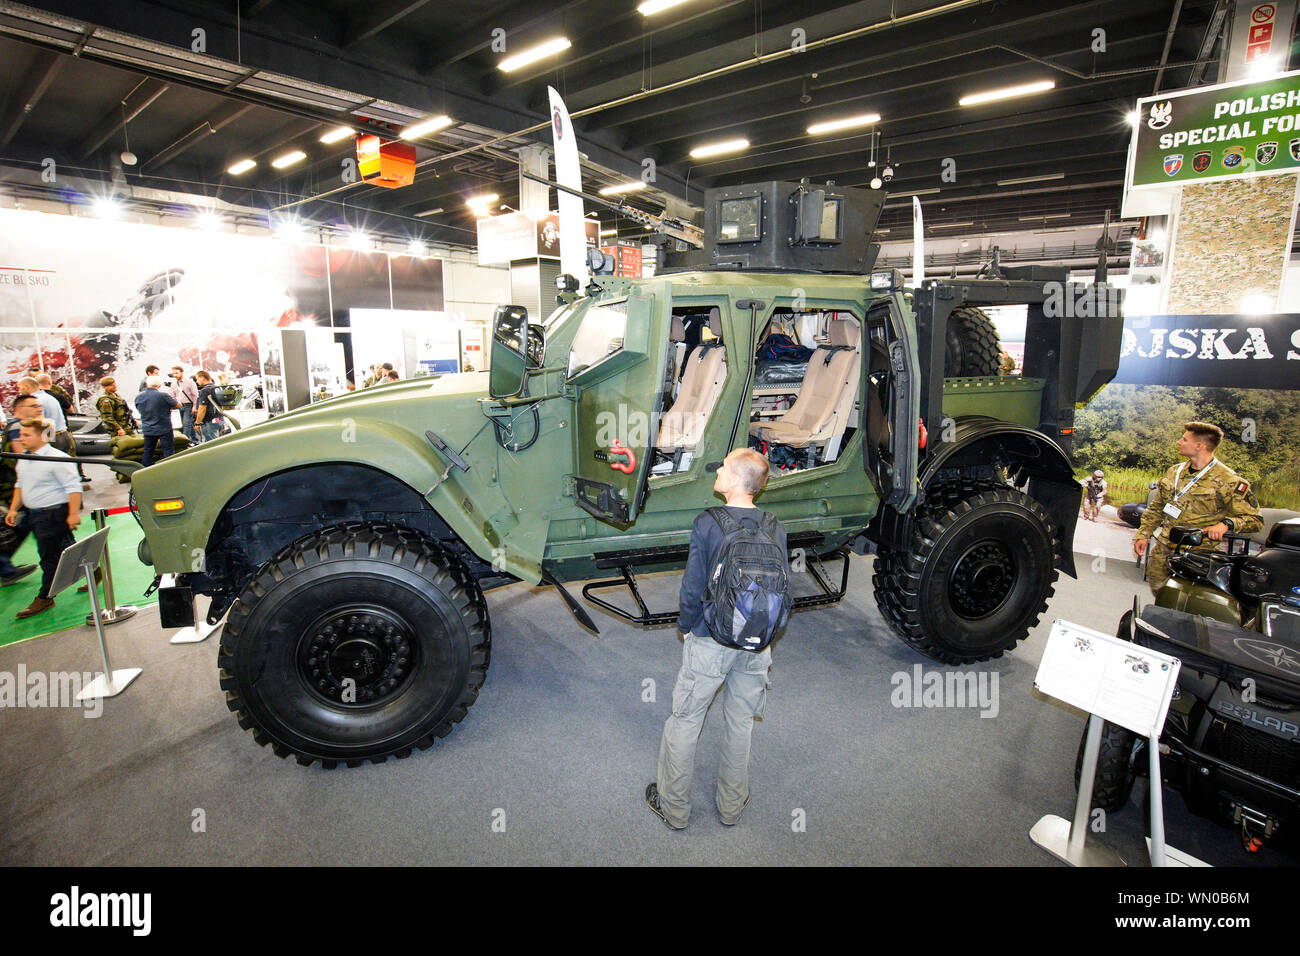 (190905) -- KIELCE (POLAND), Sept. 5, 2019 (Xinhua) -- An M-ATV or mine resistant ambush protected vehicle is displayed at the 27th International Defence Industry Exhibition in Kielce, Poland, on Sept. 5, 2019. The 27th International Defence Industry Exhibition MSPO, one of the largest in Central and Eastern Europe with around 600 exhibitors, is held here from Sept. 3 to Sept. 6. (Photo by Jaap Arriens/Xinhua) Stock Photo